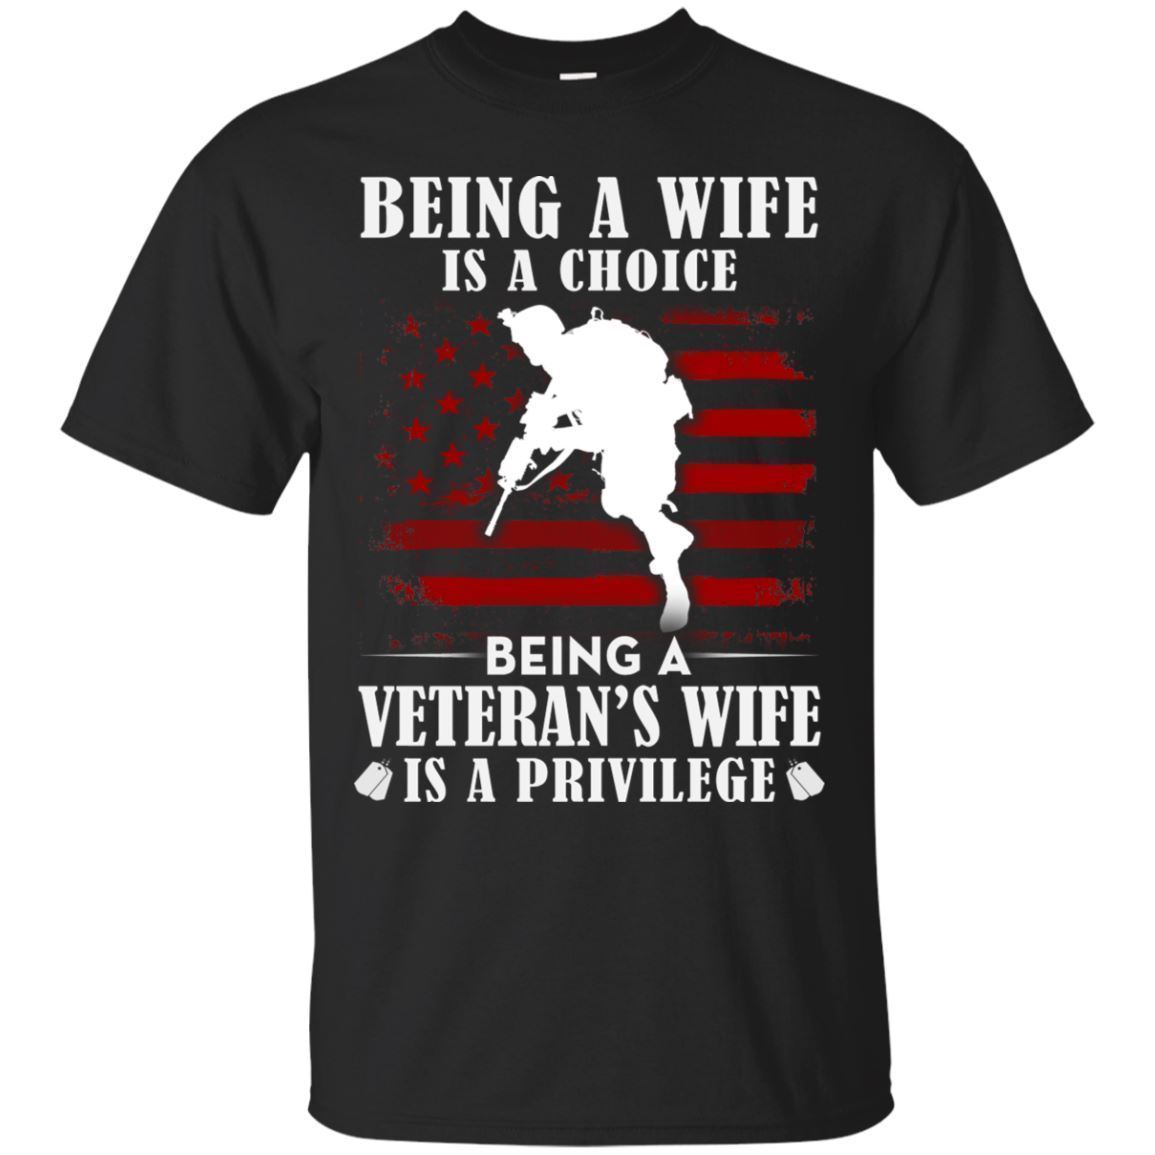 Being A Veteran's Wife T-Shirt Gift For Men, Women On Army Veterans Day ...